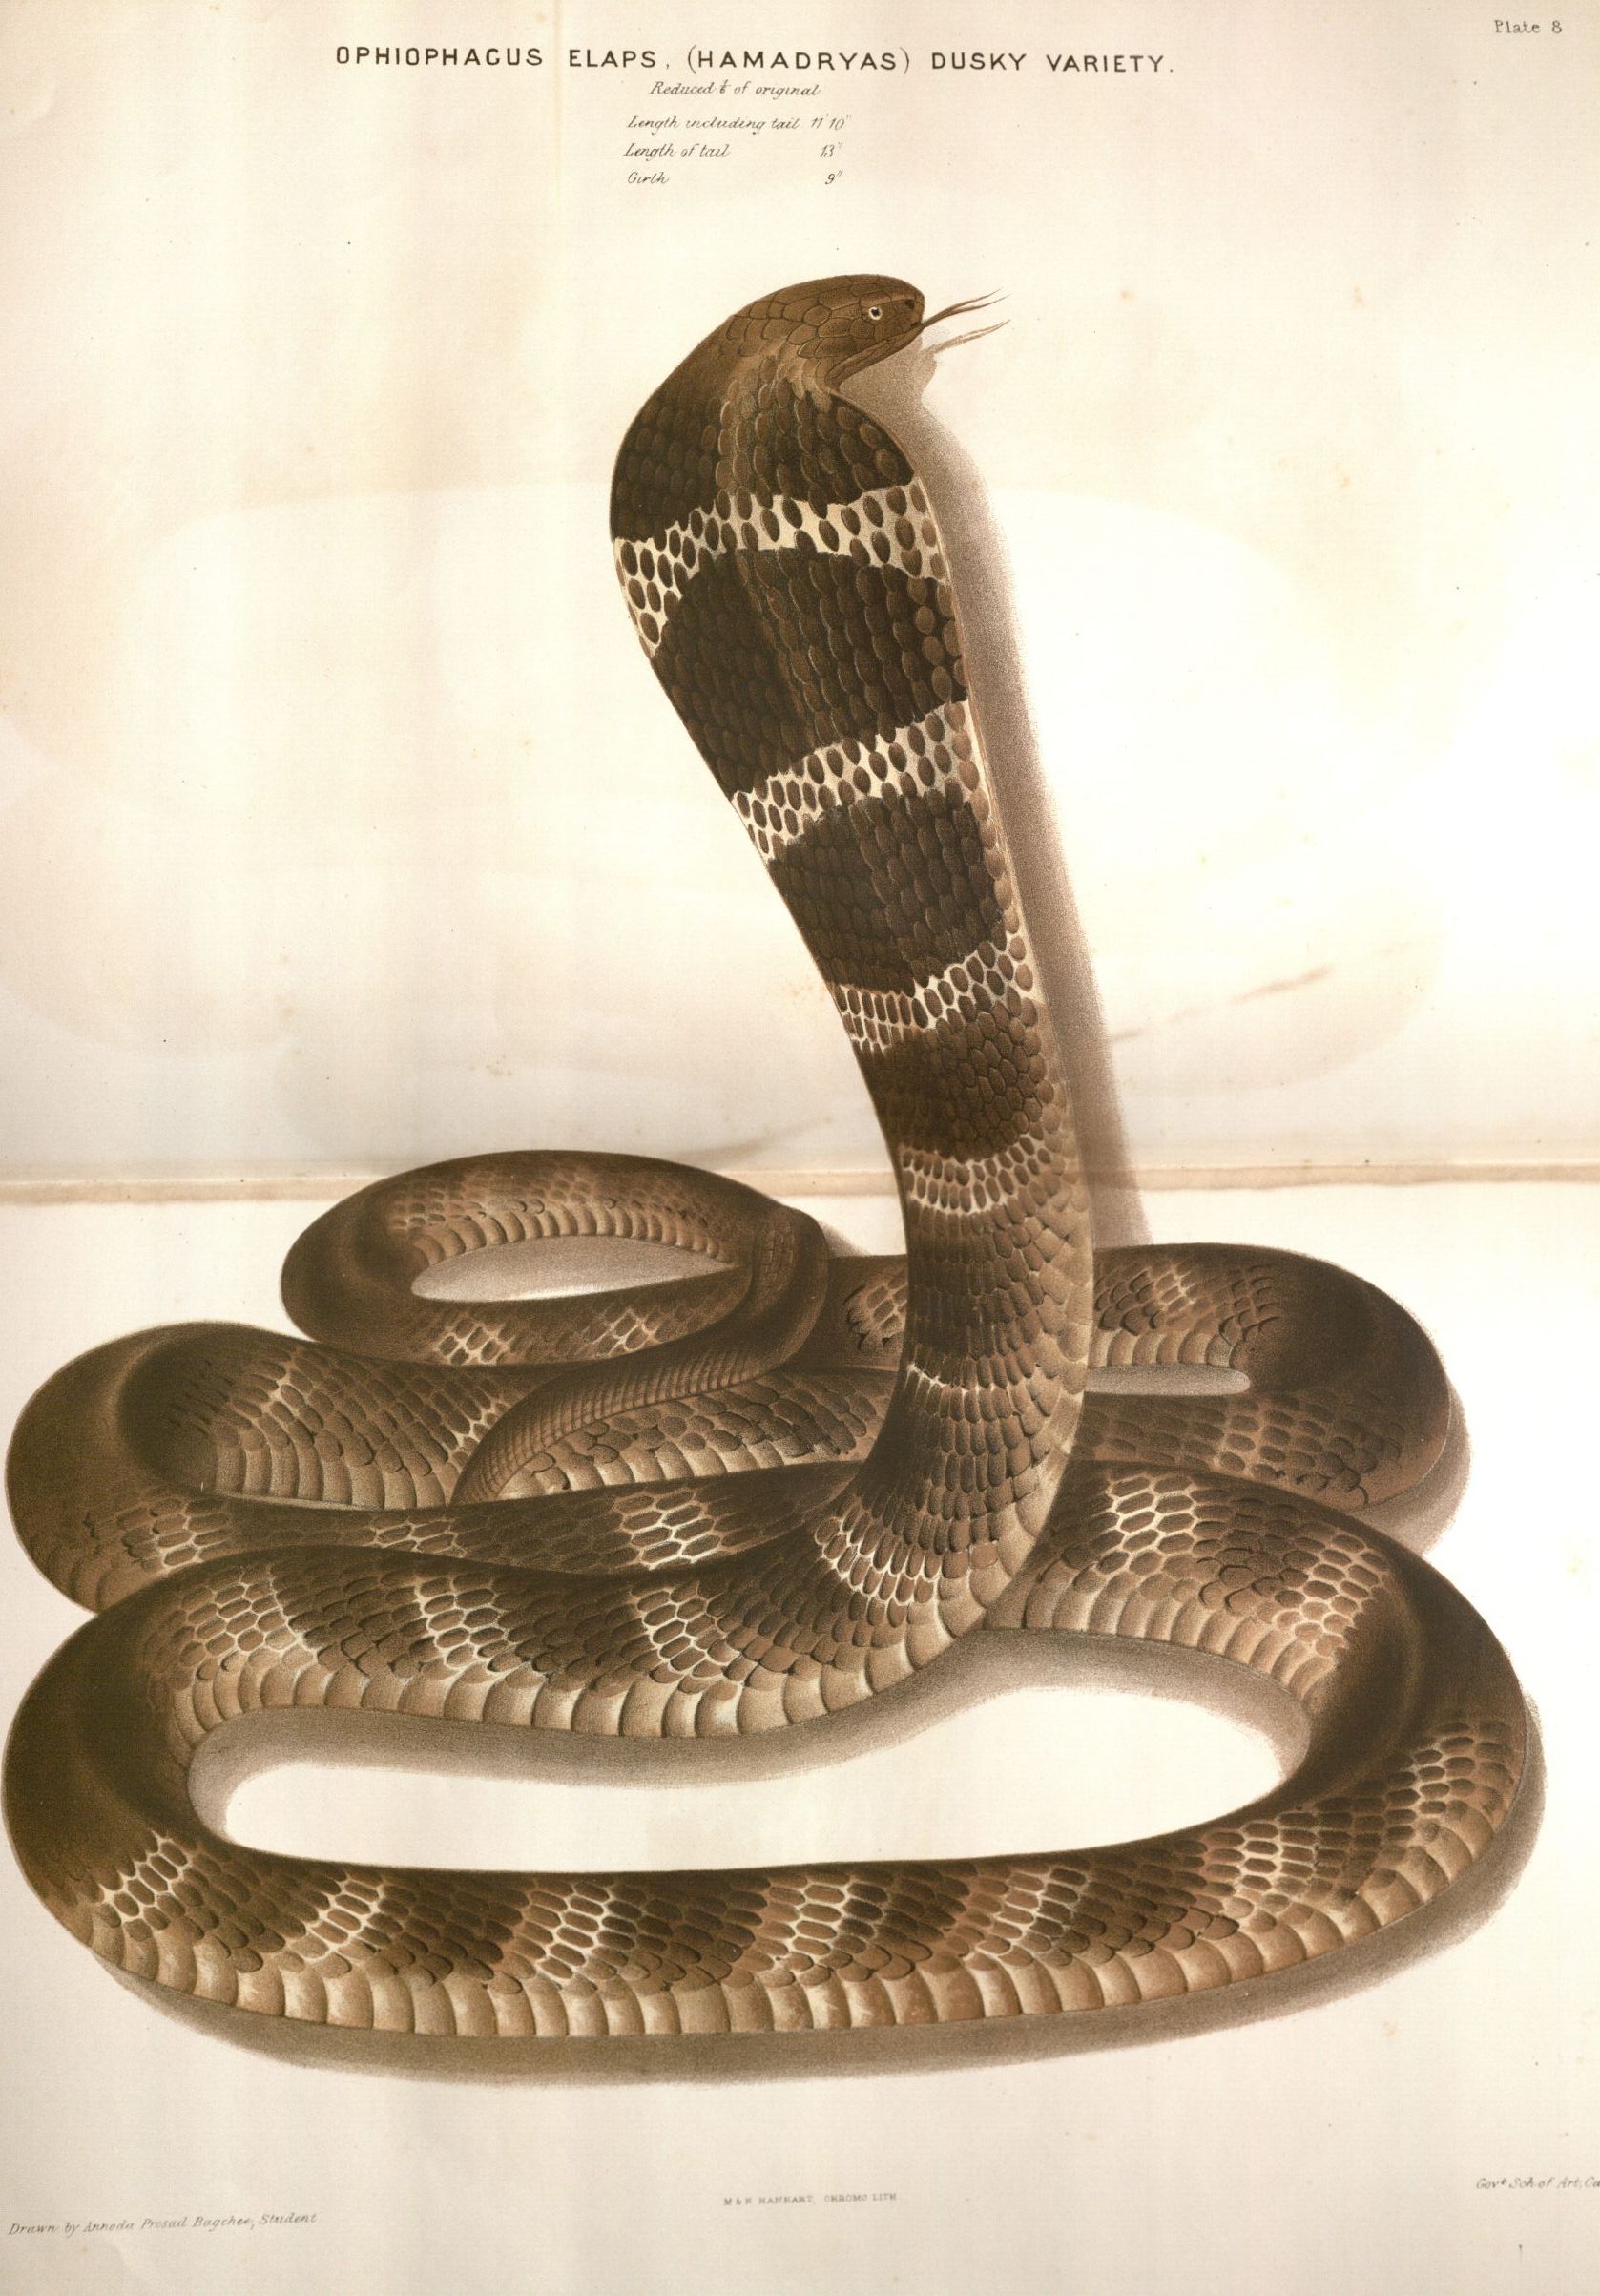 Image of a cobra, Ophiophagus Elaps (plate 8) from Fayrer's the Thanatophidia of India